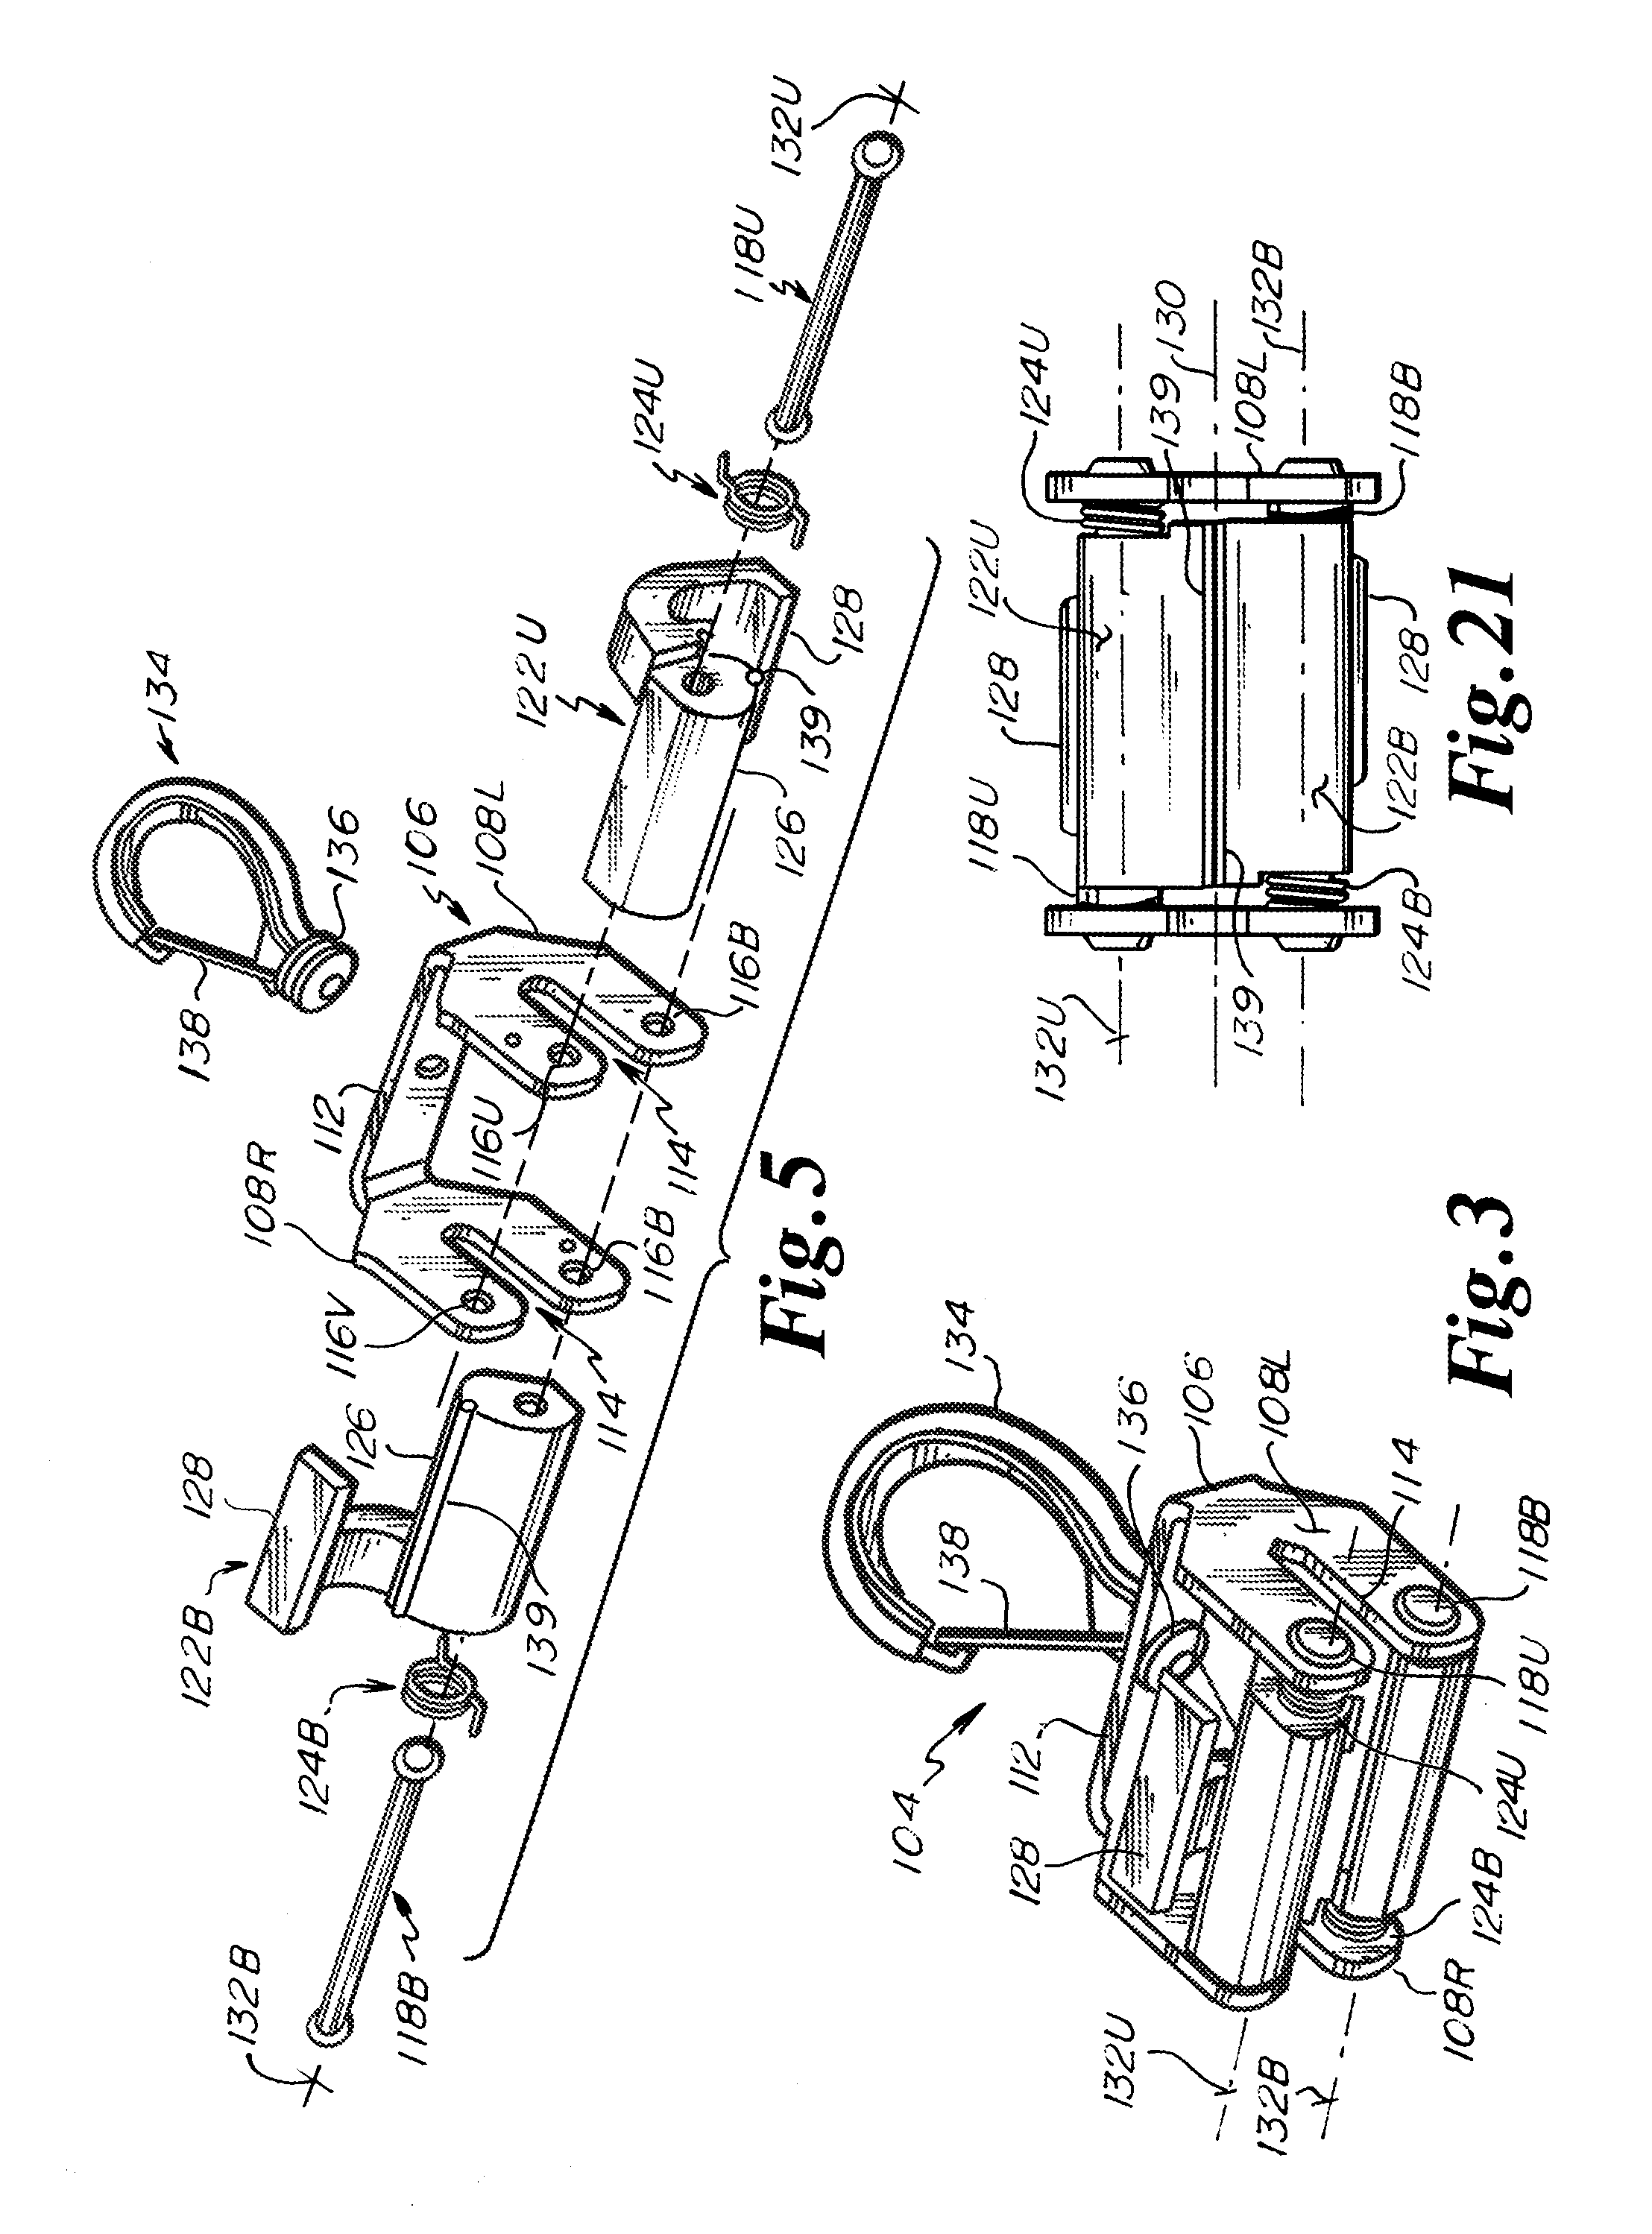 Universal covering system